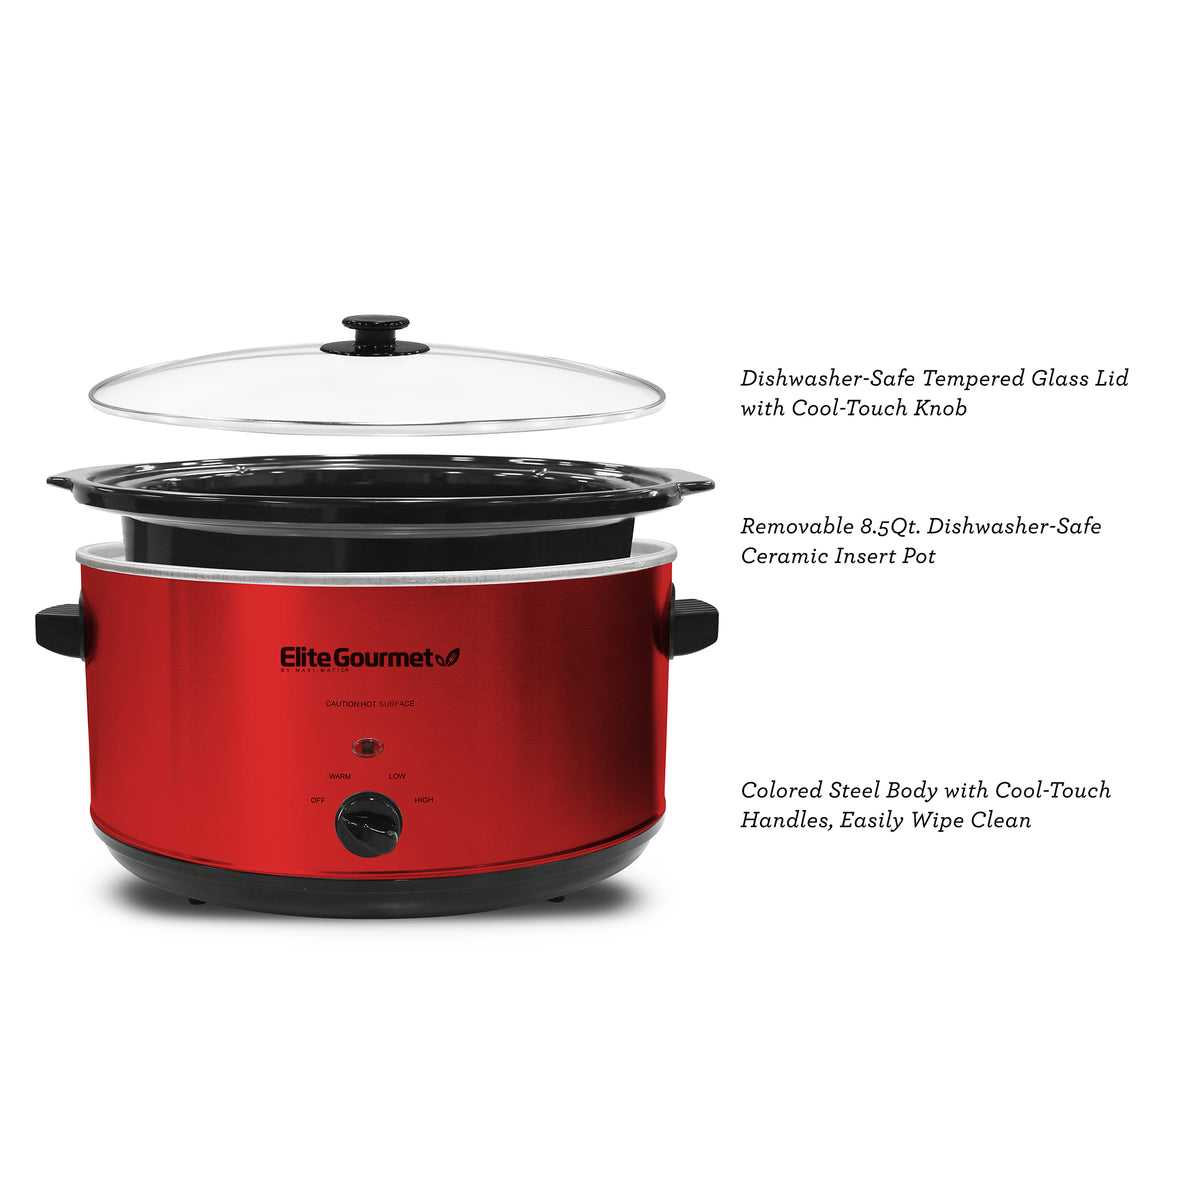 Slow Cooker w/Travel Bag 5 Quart Oval Red